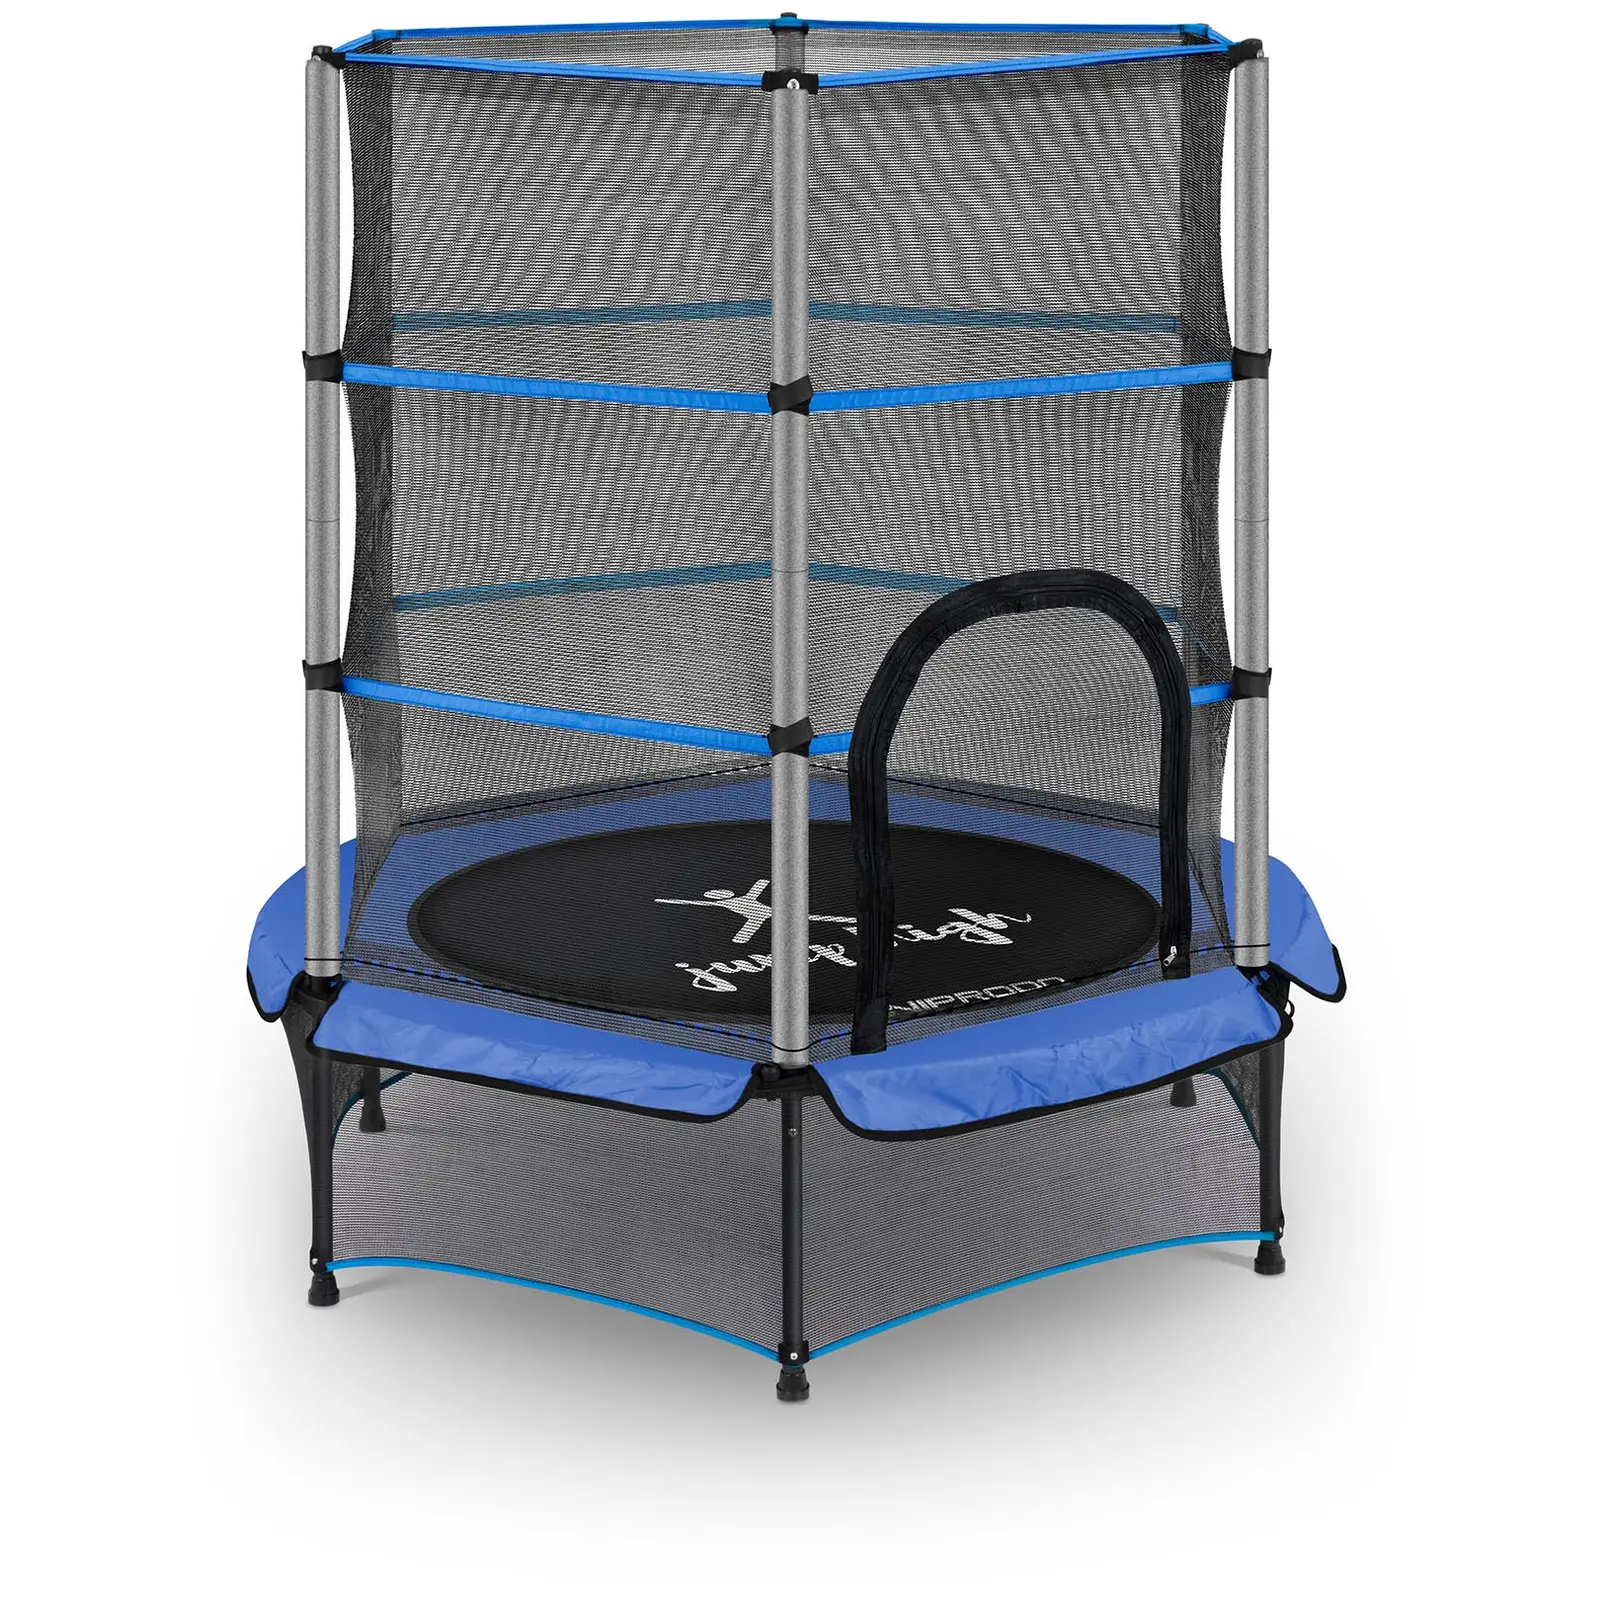 Factory second Kid's Trampoline - with safety net - 140 cm - 50 kg - blue